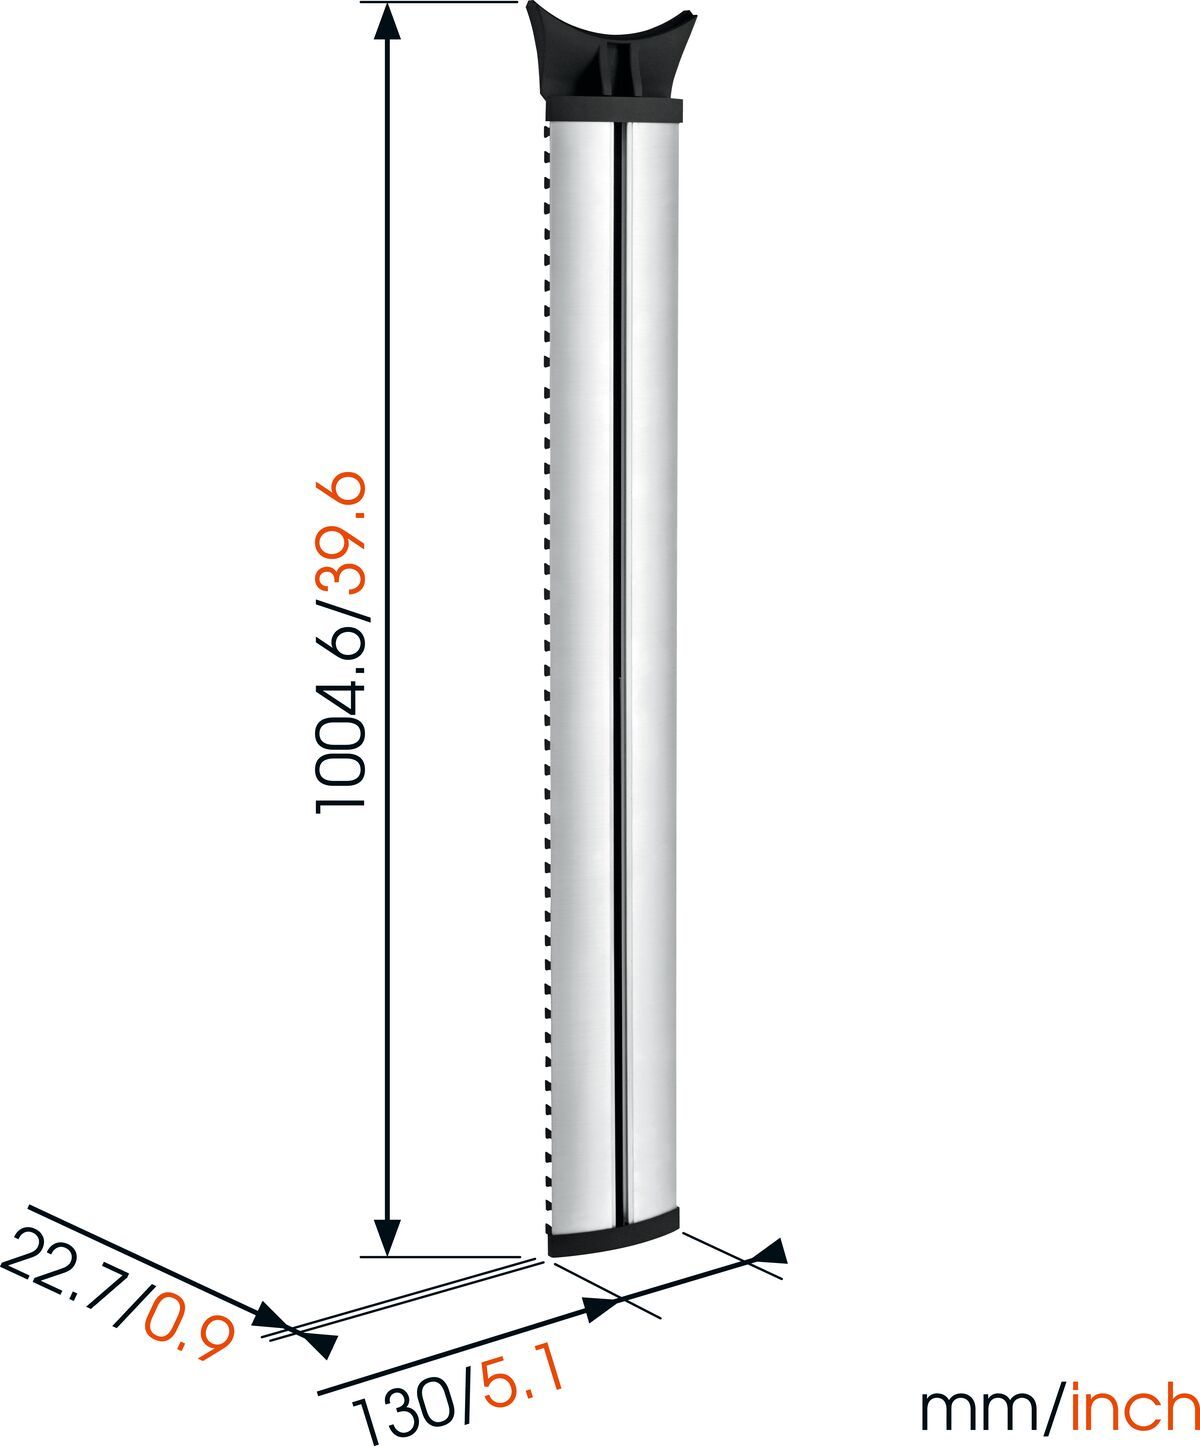 Vogel's NEXT 7840 Cable Column - Max. number of cables to hold: Up to 10 cables - Length: 100 cm - Dimensions